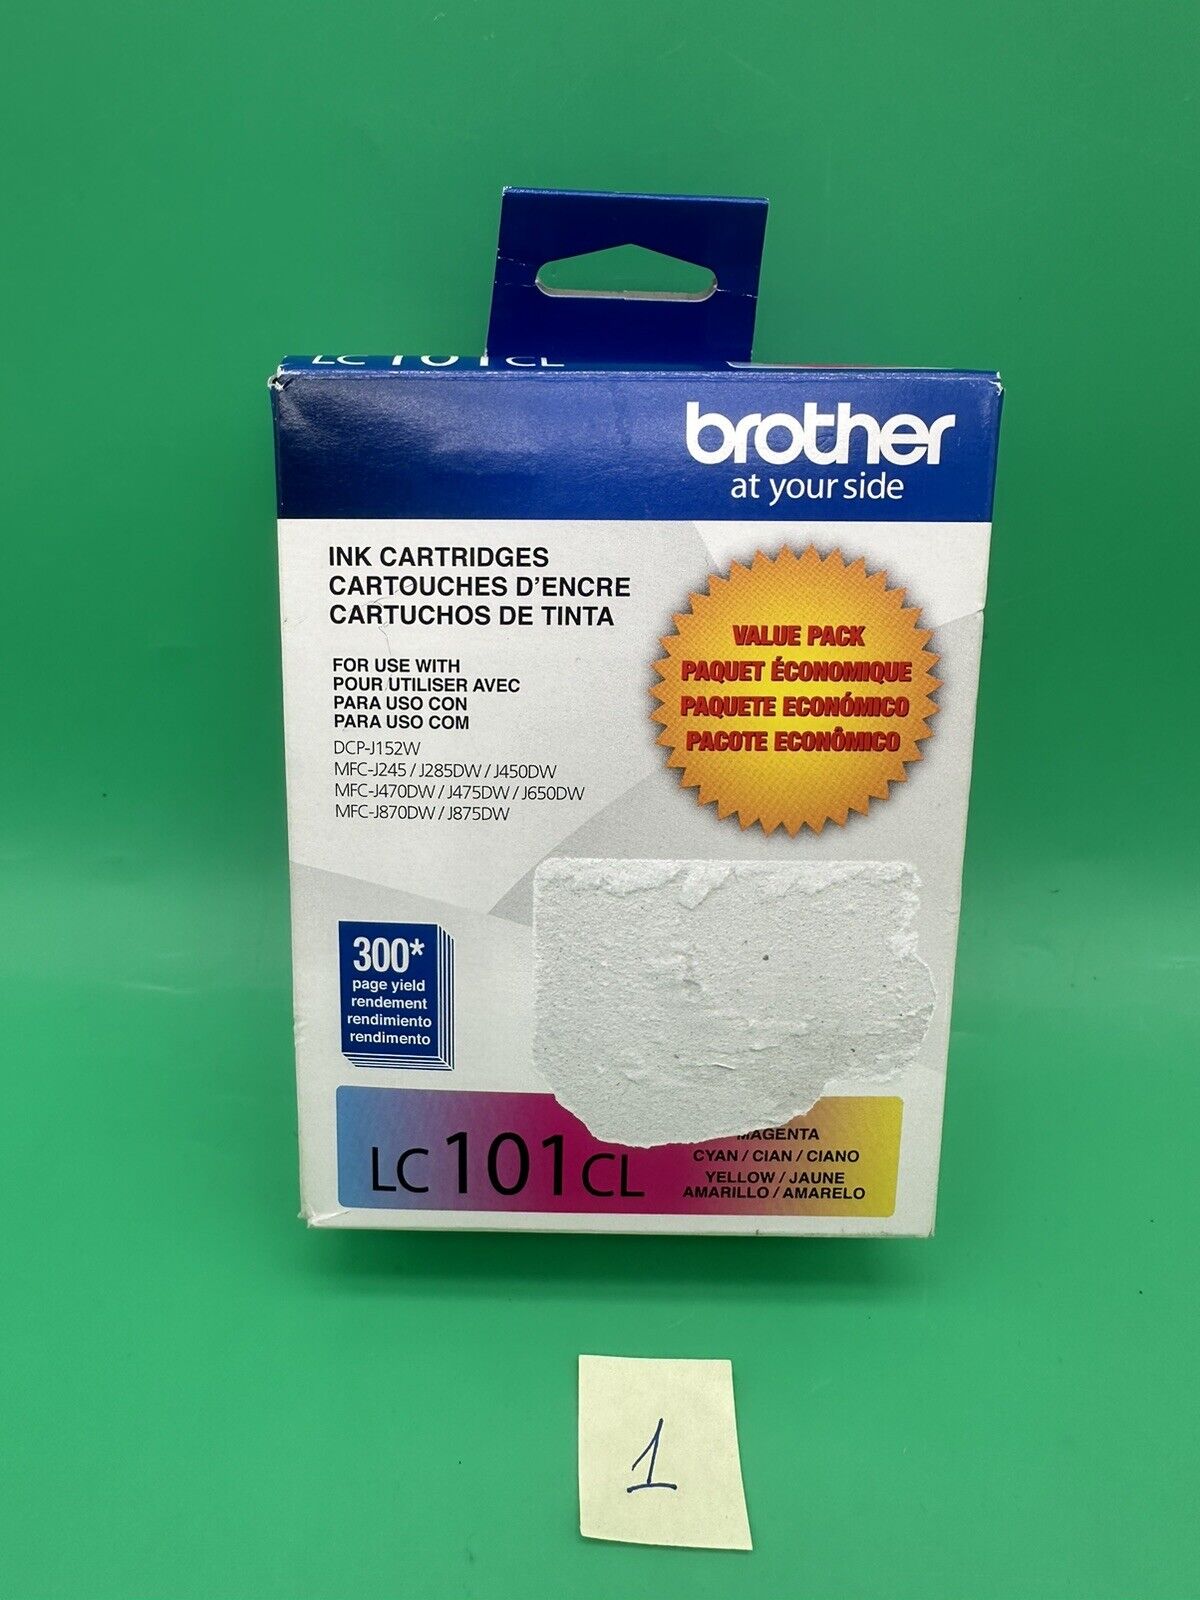 New/Open Box Brother LC 101 CL  Ink Cartridge Magenta Cyan Yellow Exp. 04/2025